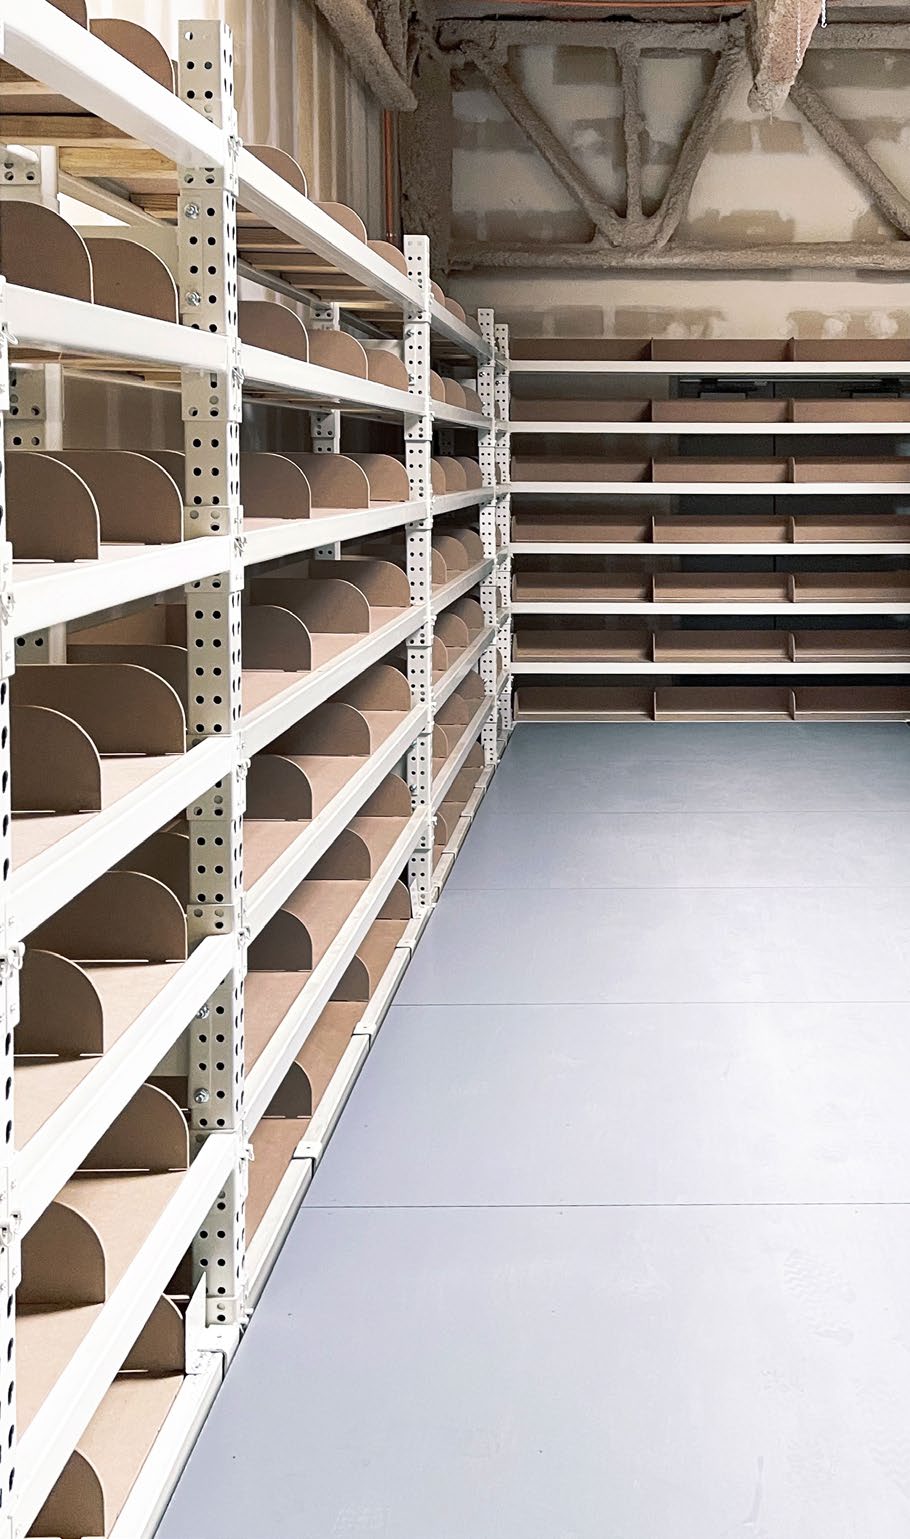 ResinDek® Shelving System Selected for Fire Code and Seismic Compliance